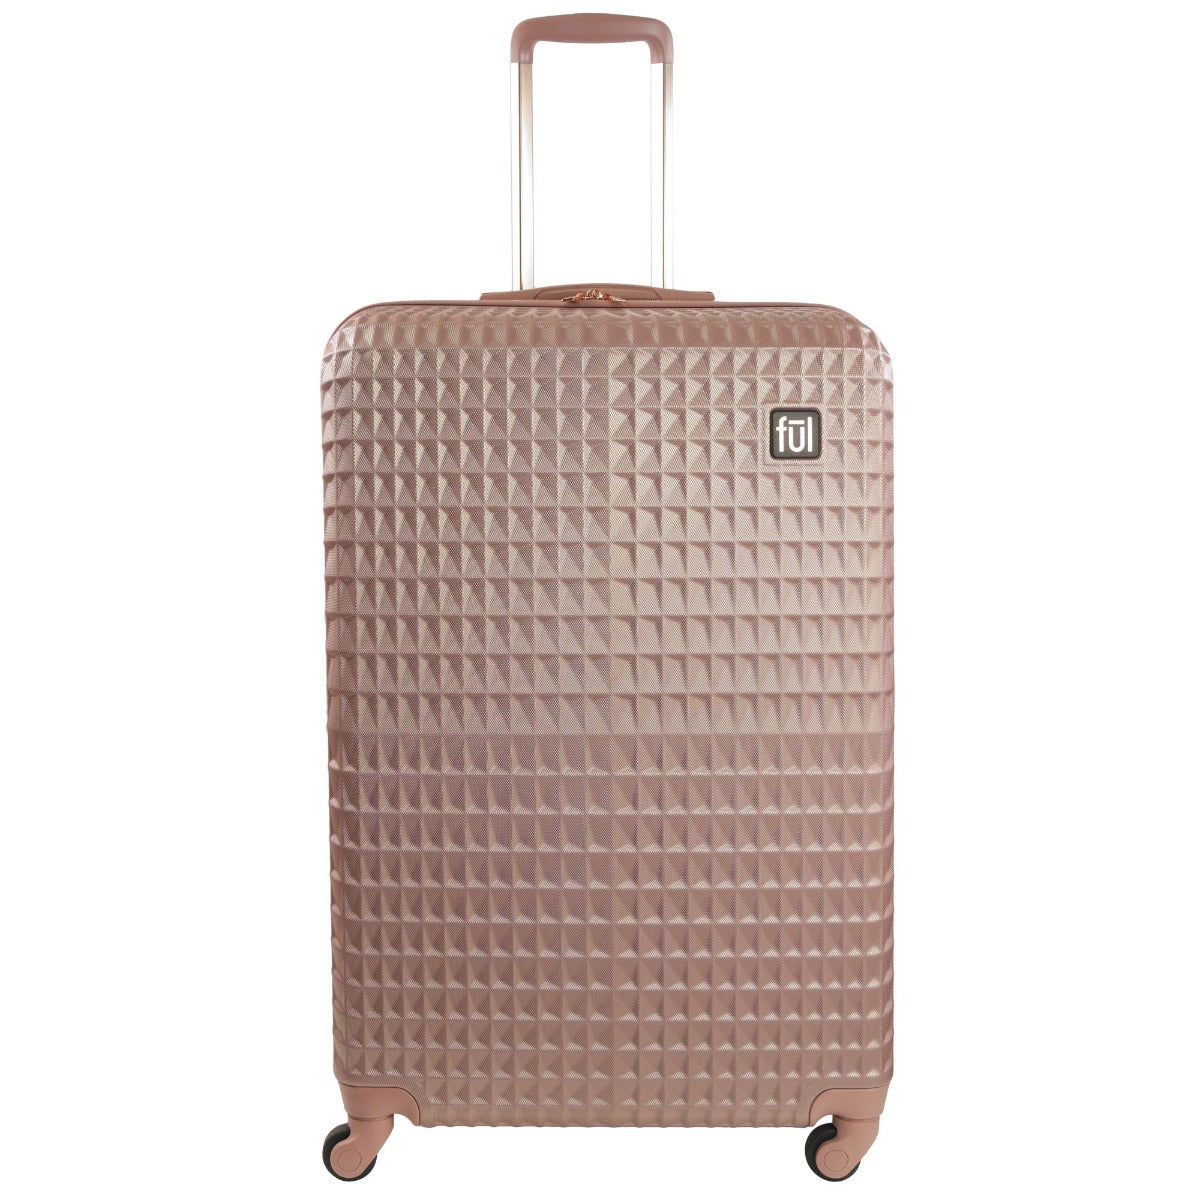 Ful Geo 31" Hard-sided Spinner Suitcase Luggage Rose Gold Check-in Baggage Large size